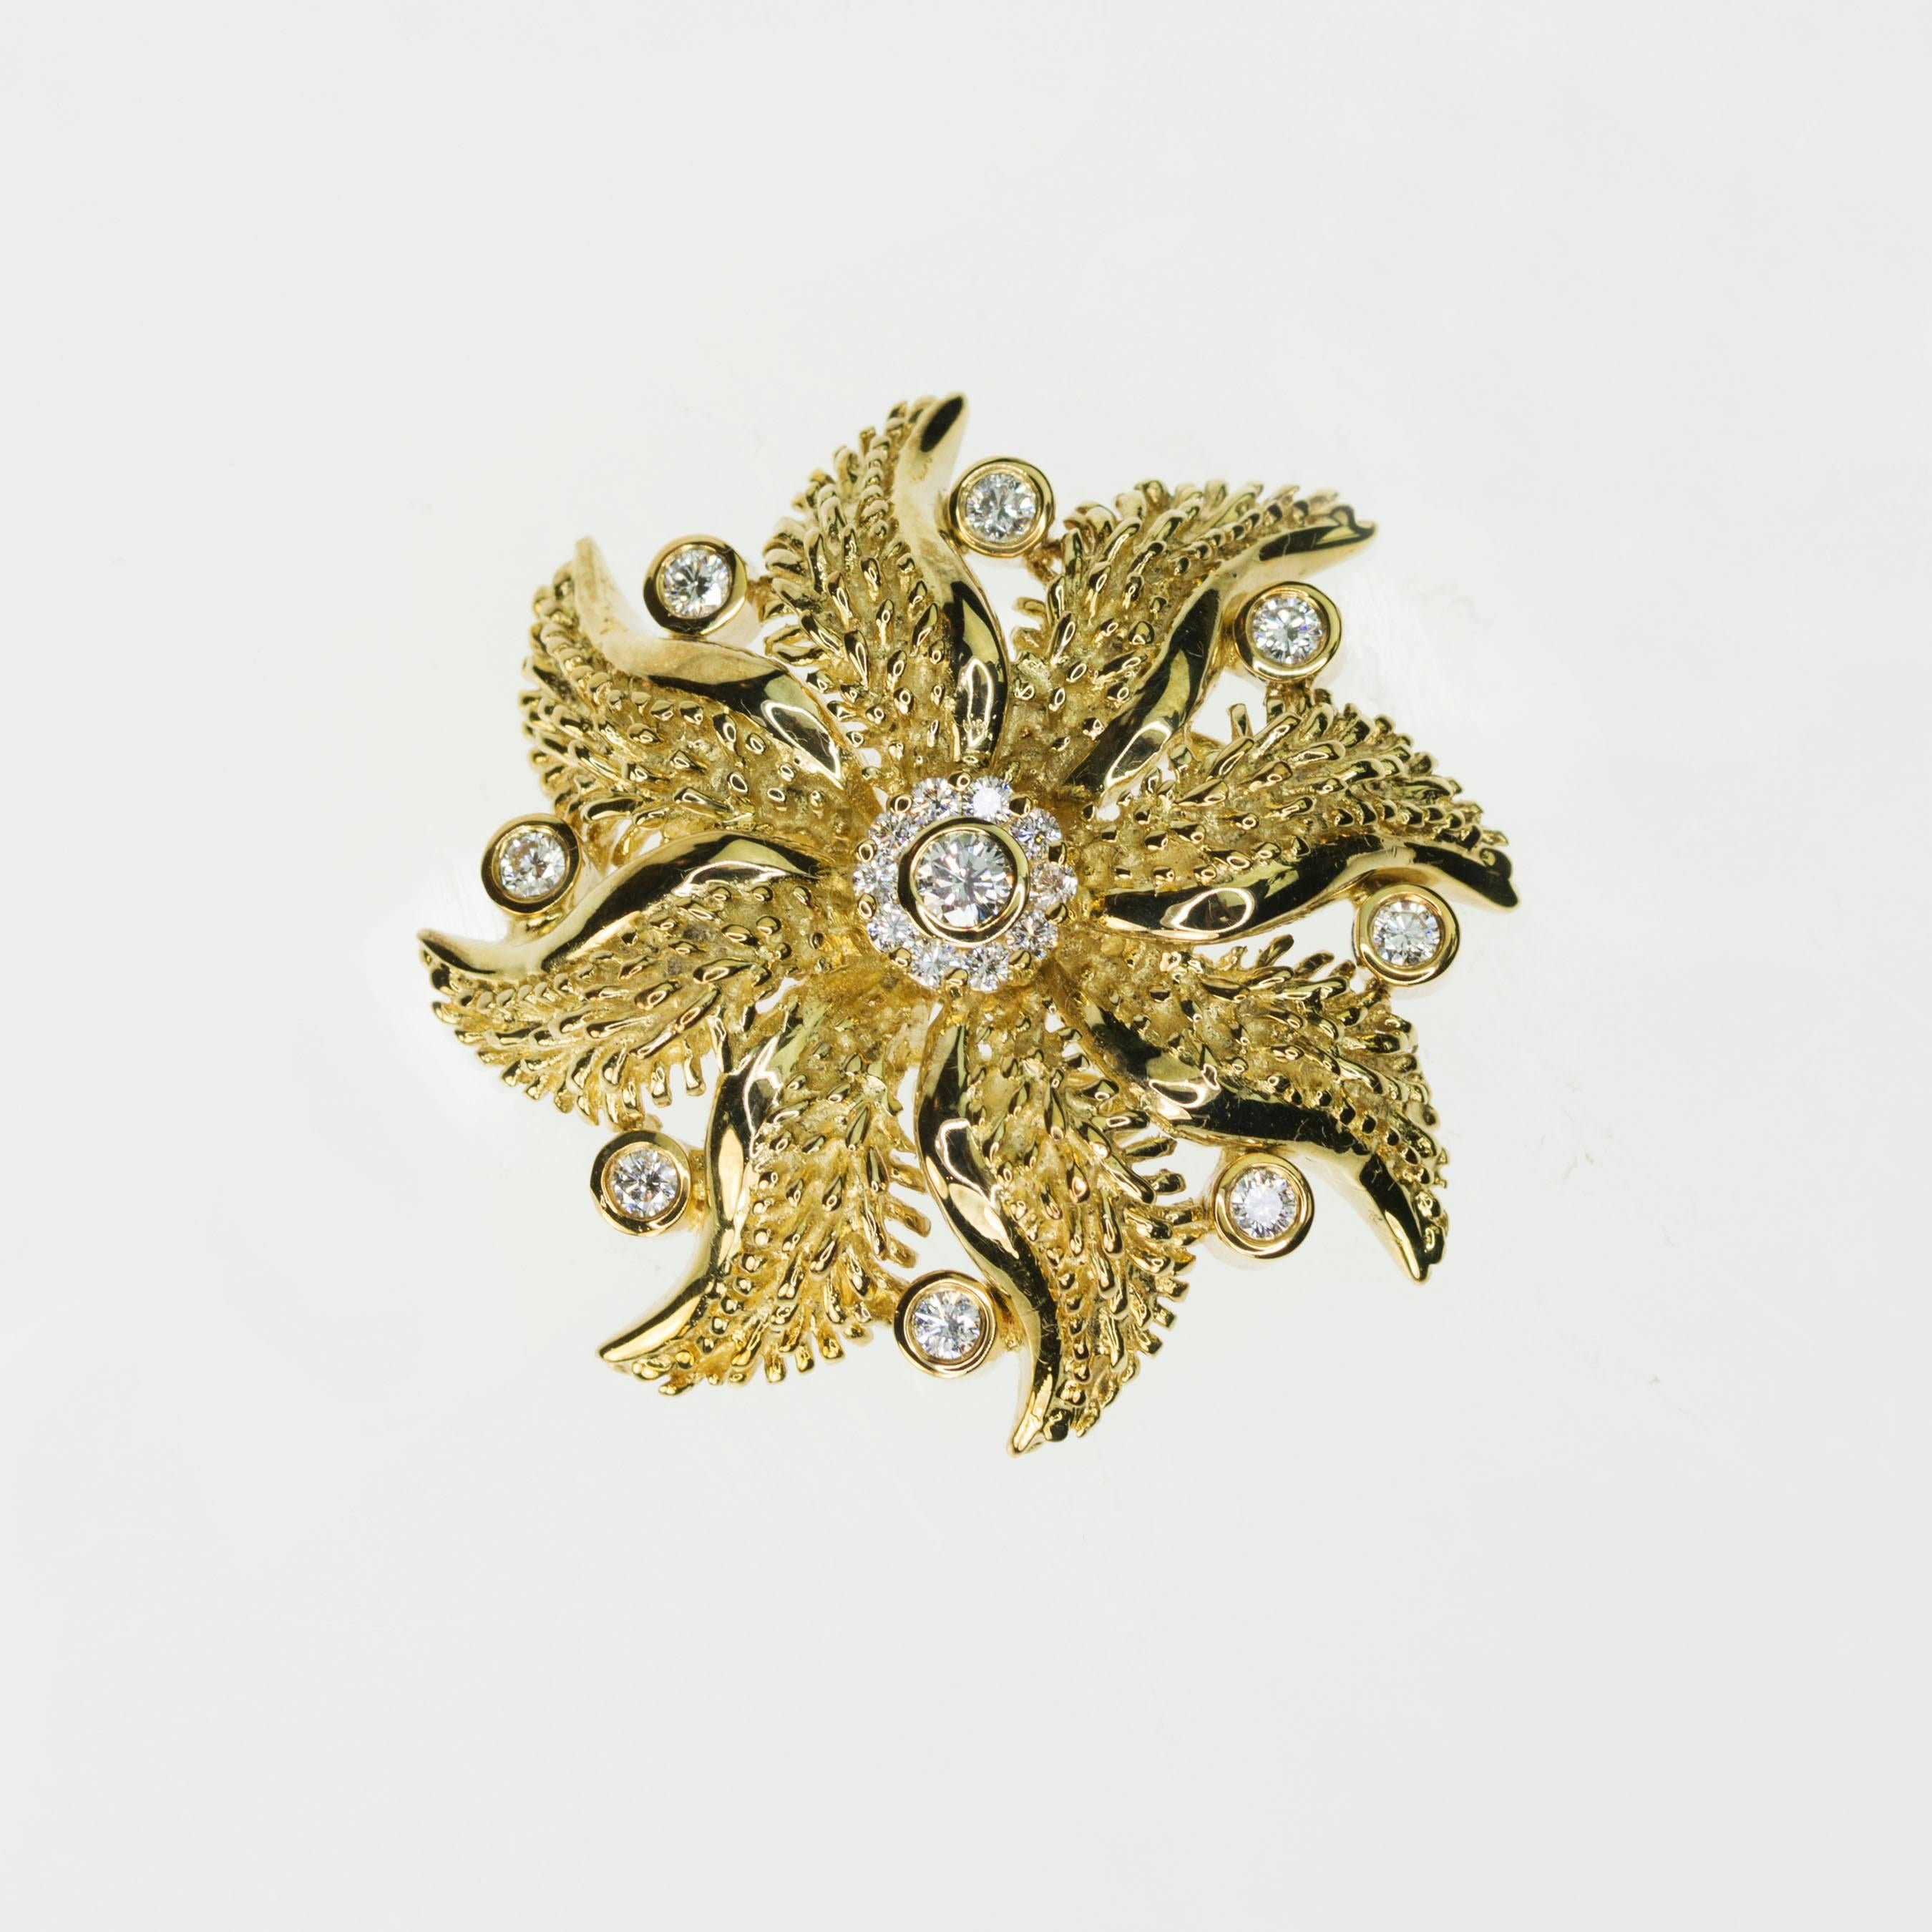 14k Floral Brooch 19 round brilliant diamonds weighing approximately 1.25 carats. 2 " wide and 18.66g of 14k gold.